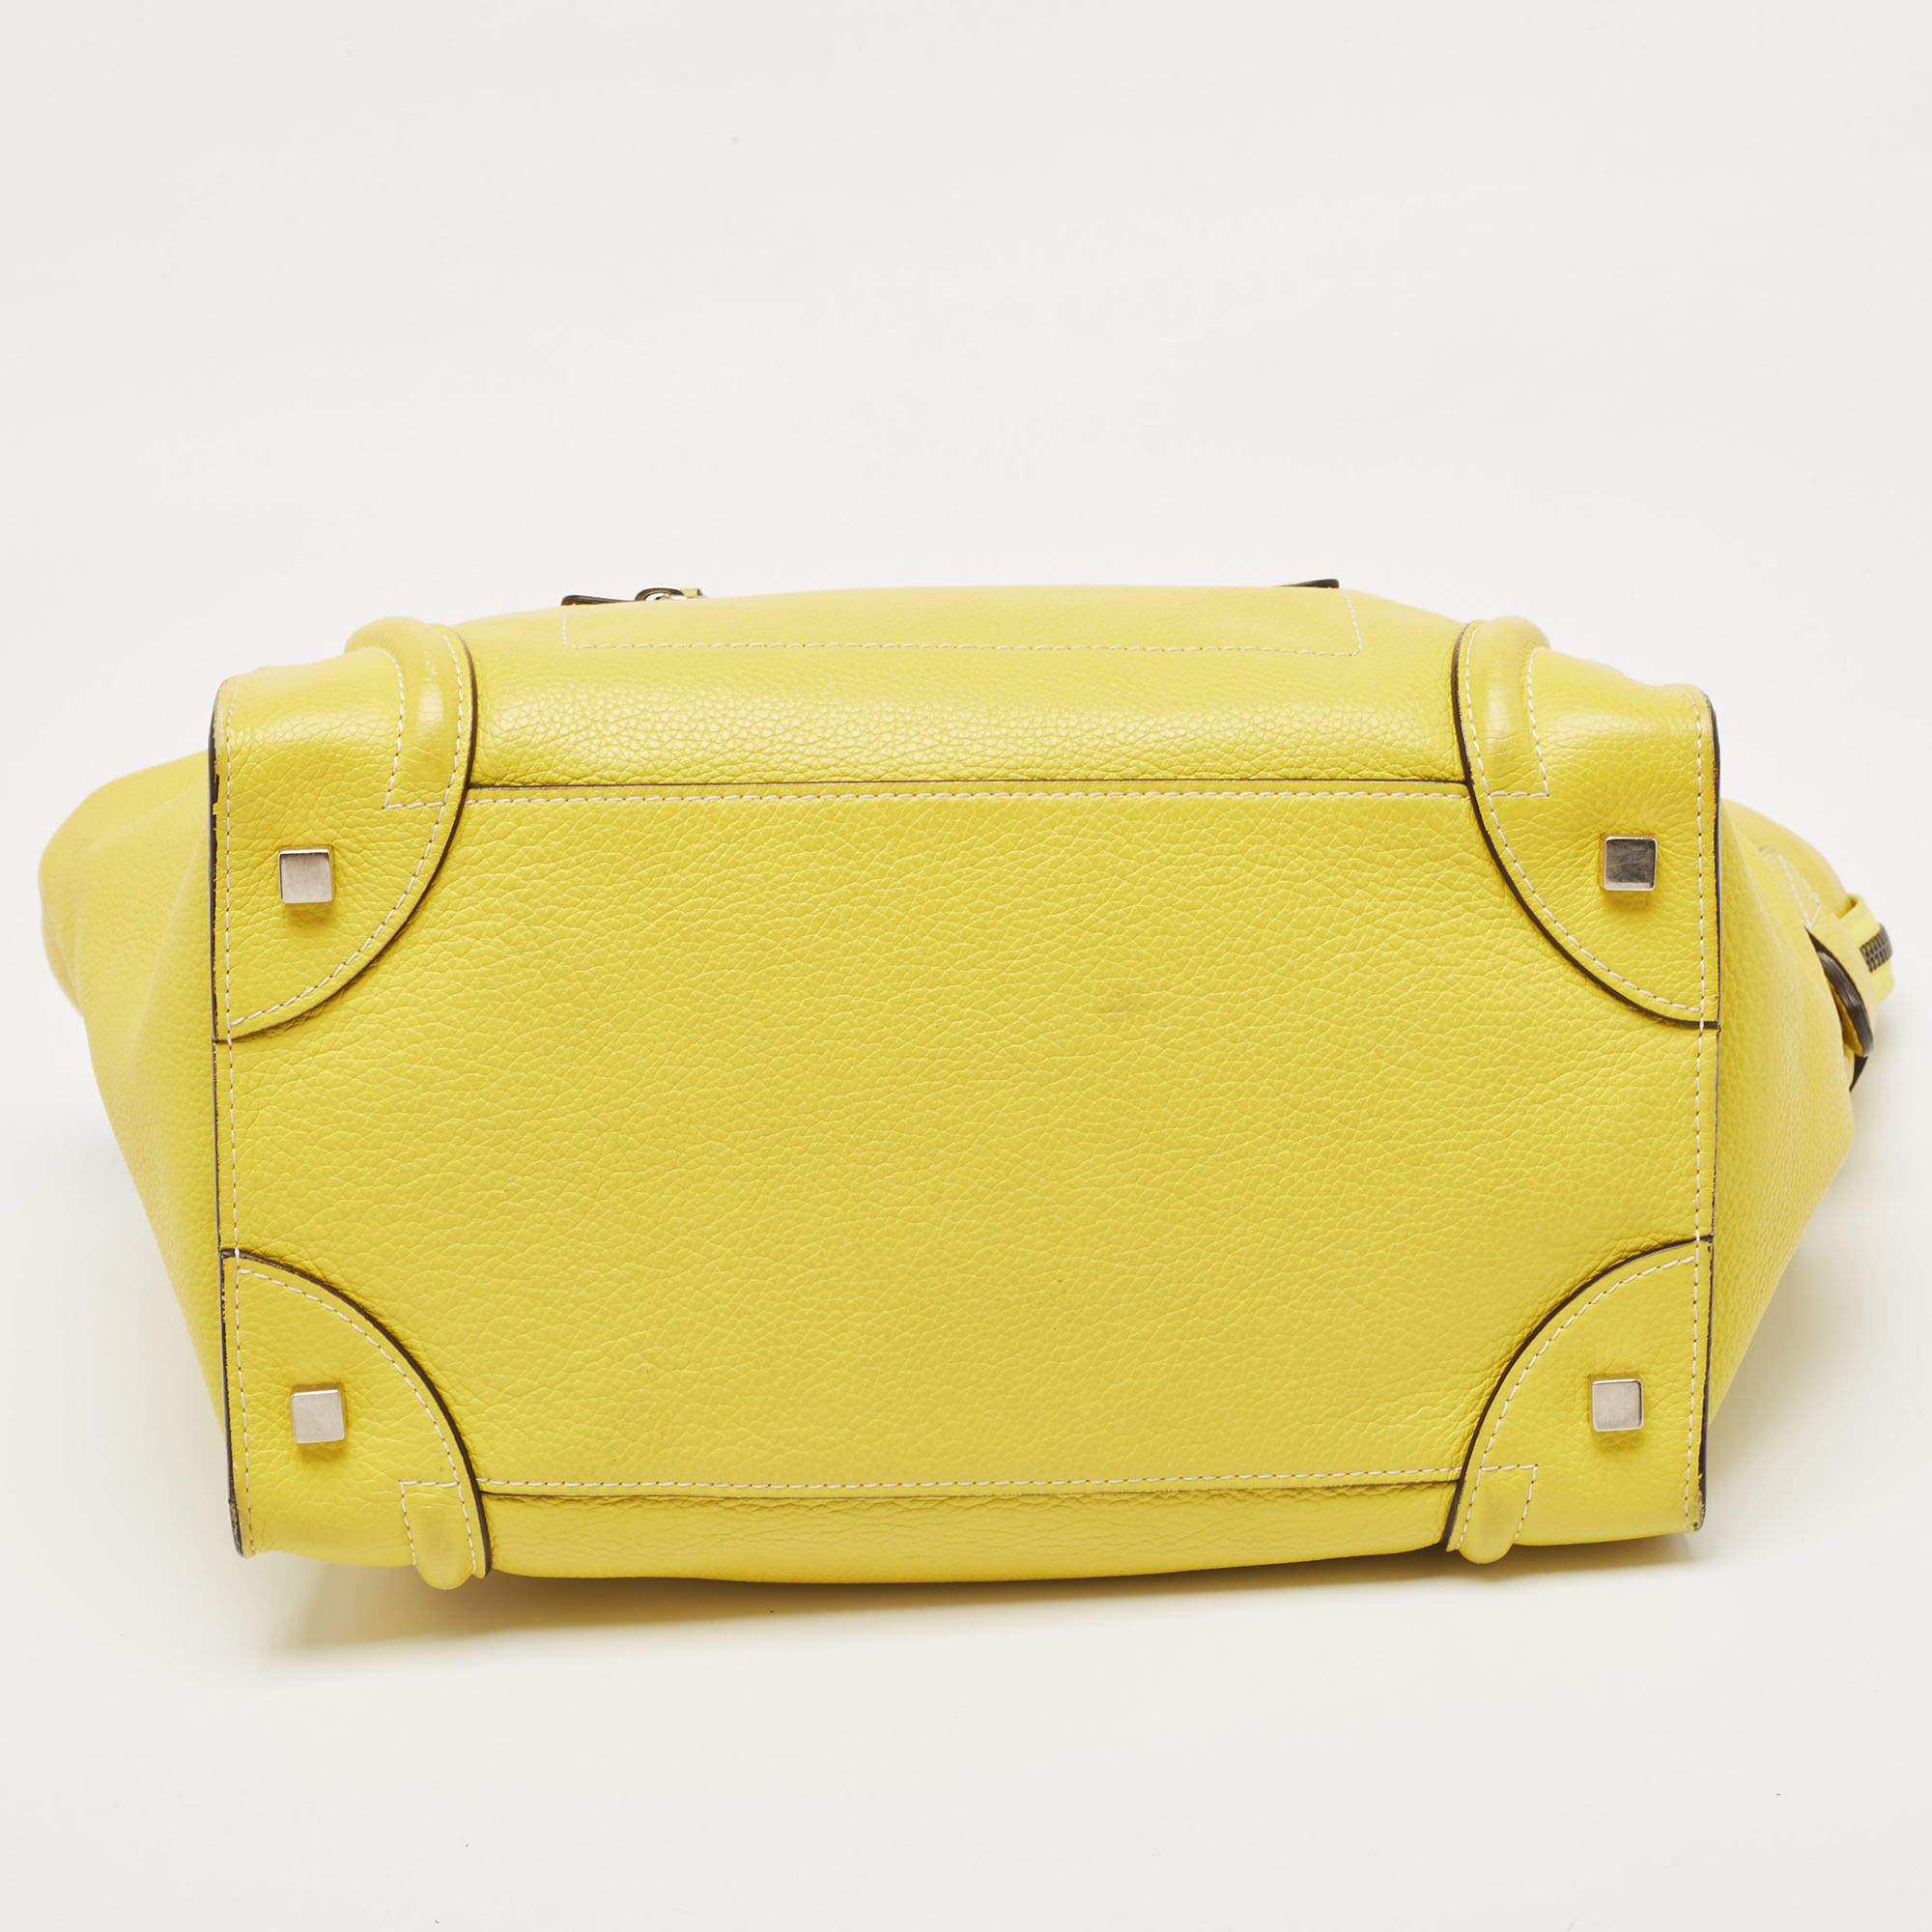 Celine Yellow Leather Mini Luggage Tote For Sale 7